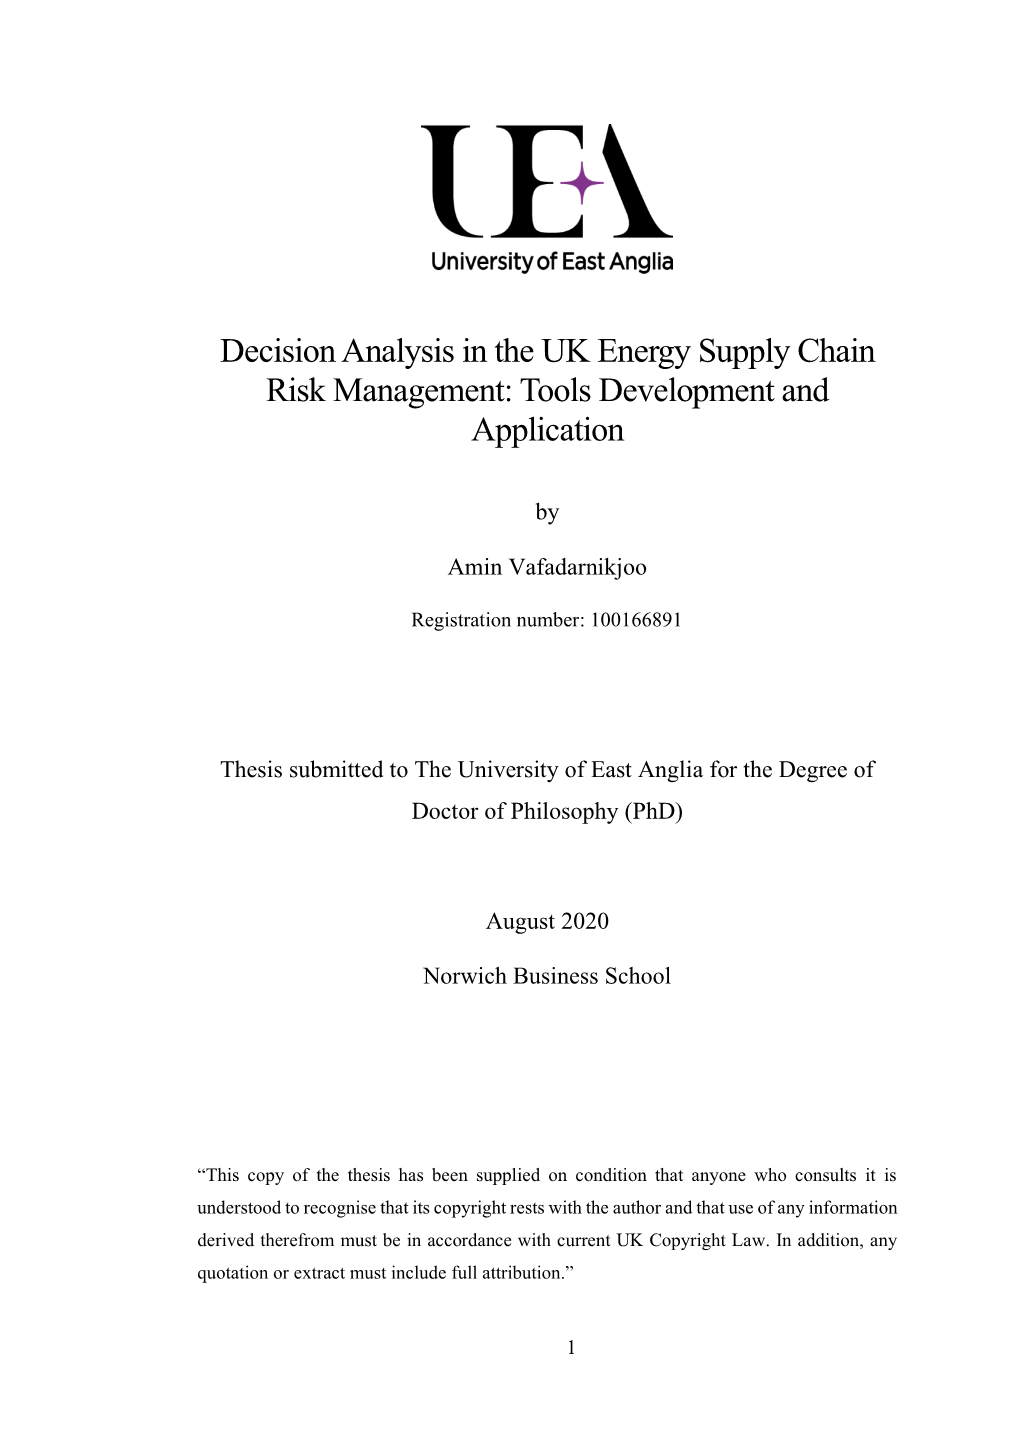 Decision Analysis in the UK Energy Supply Chain Risk Management: Tools Development and Application